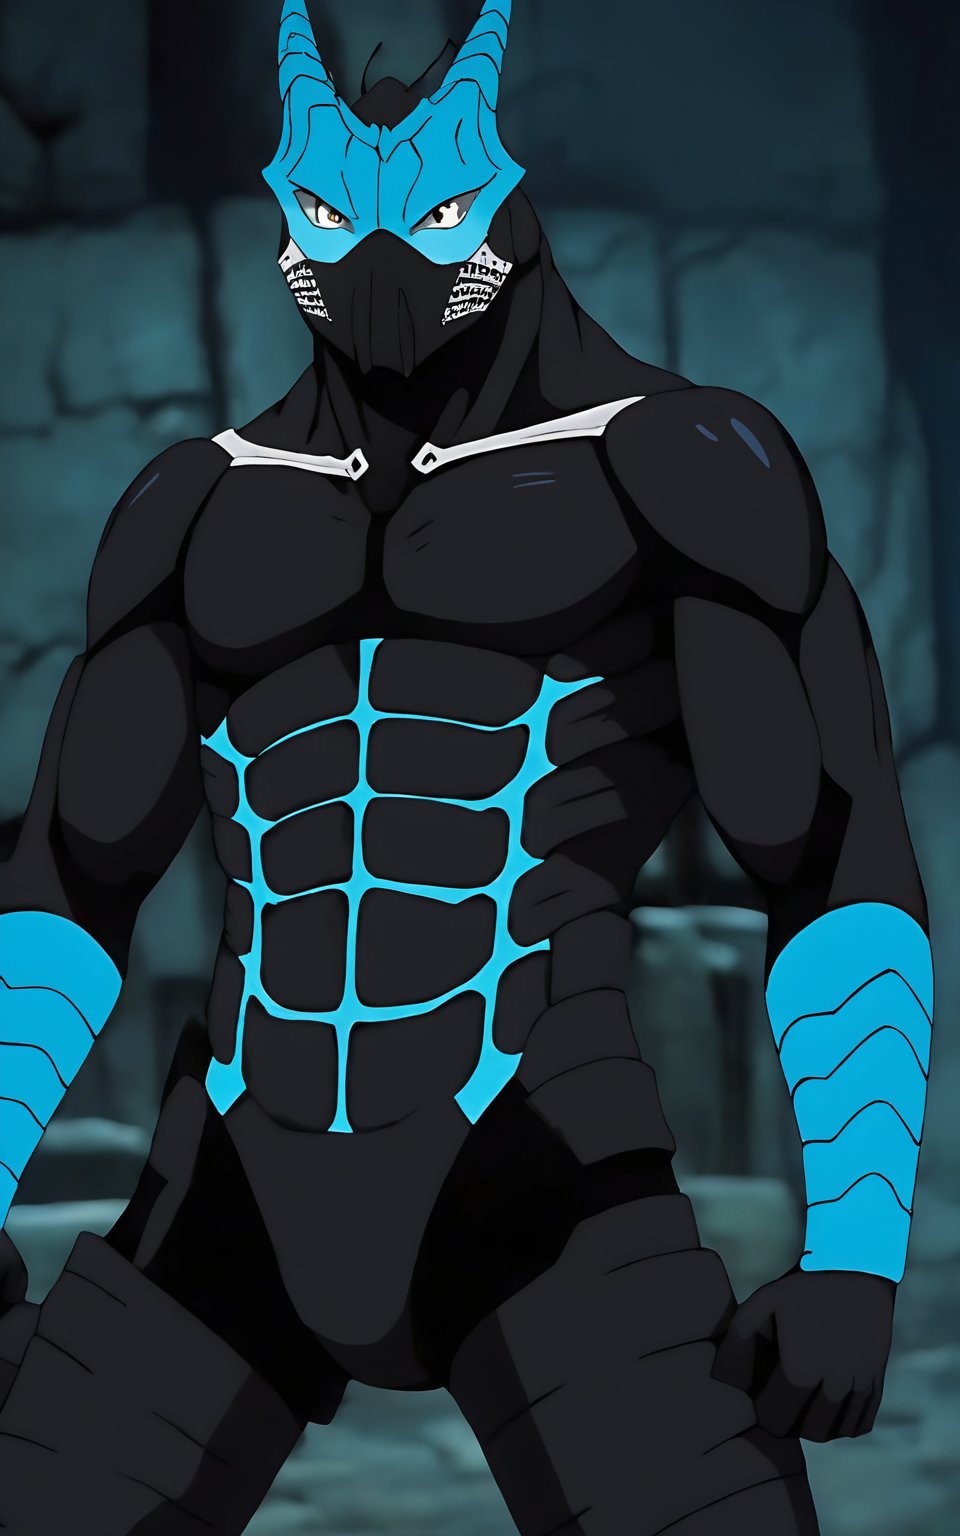 Kaiju No. 8, kafka hibino kaiju form in a black armor bodysuit with blue light coming out of his arms and legs